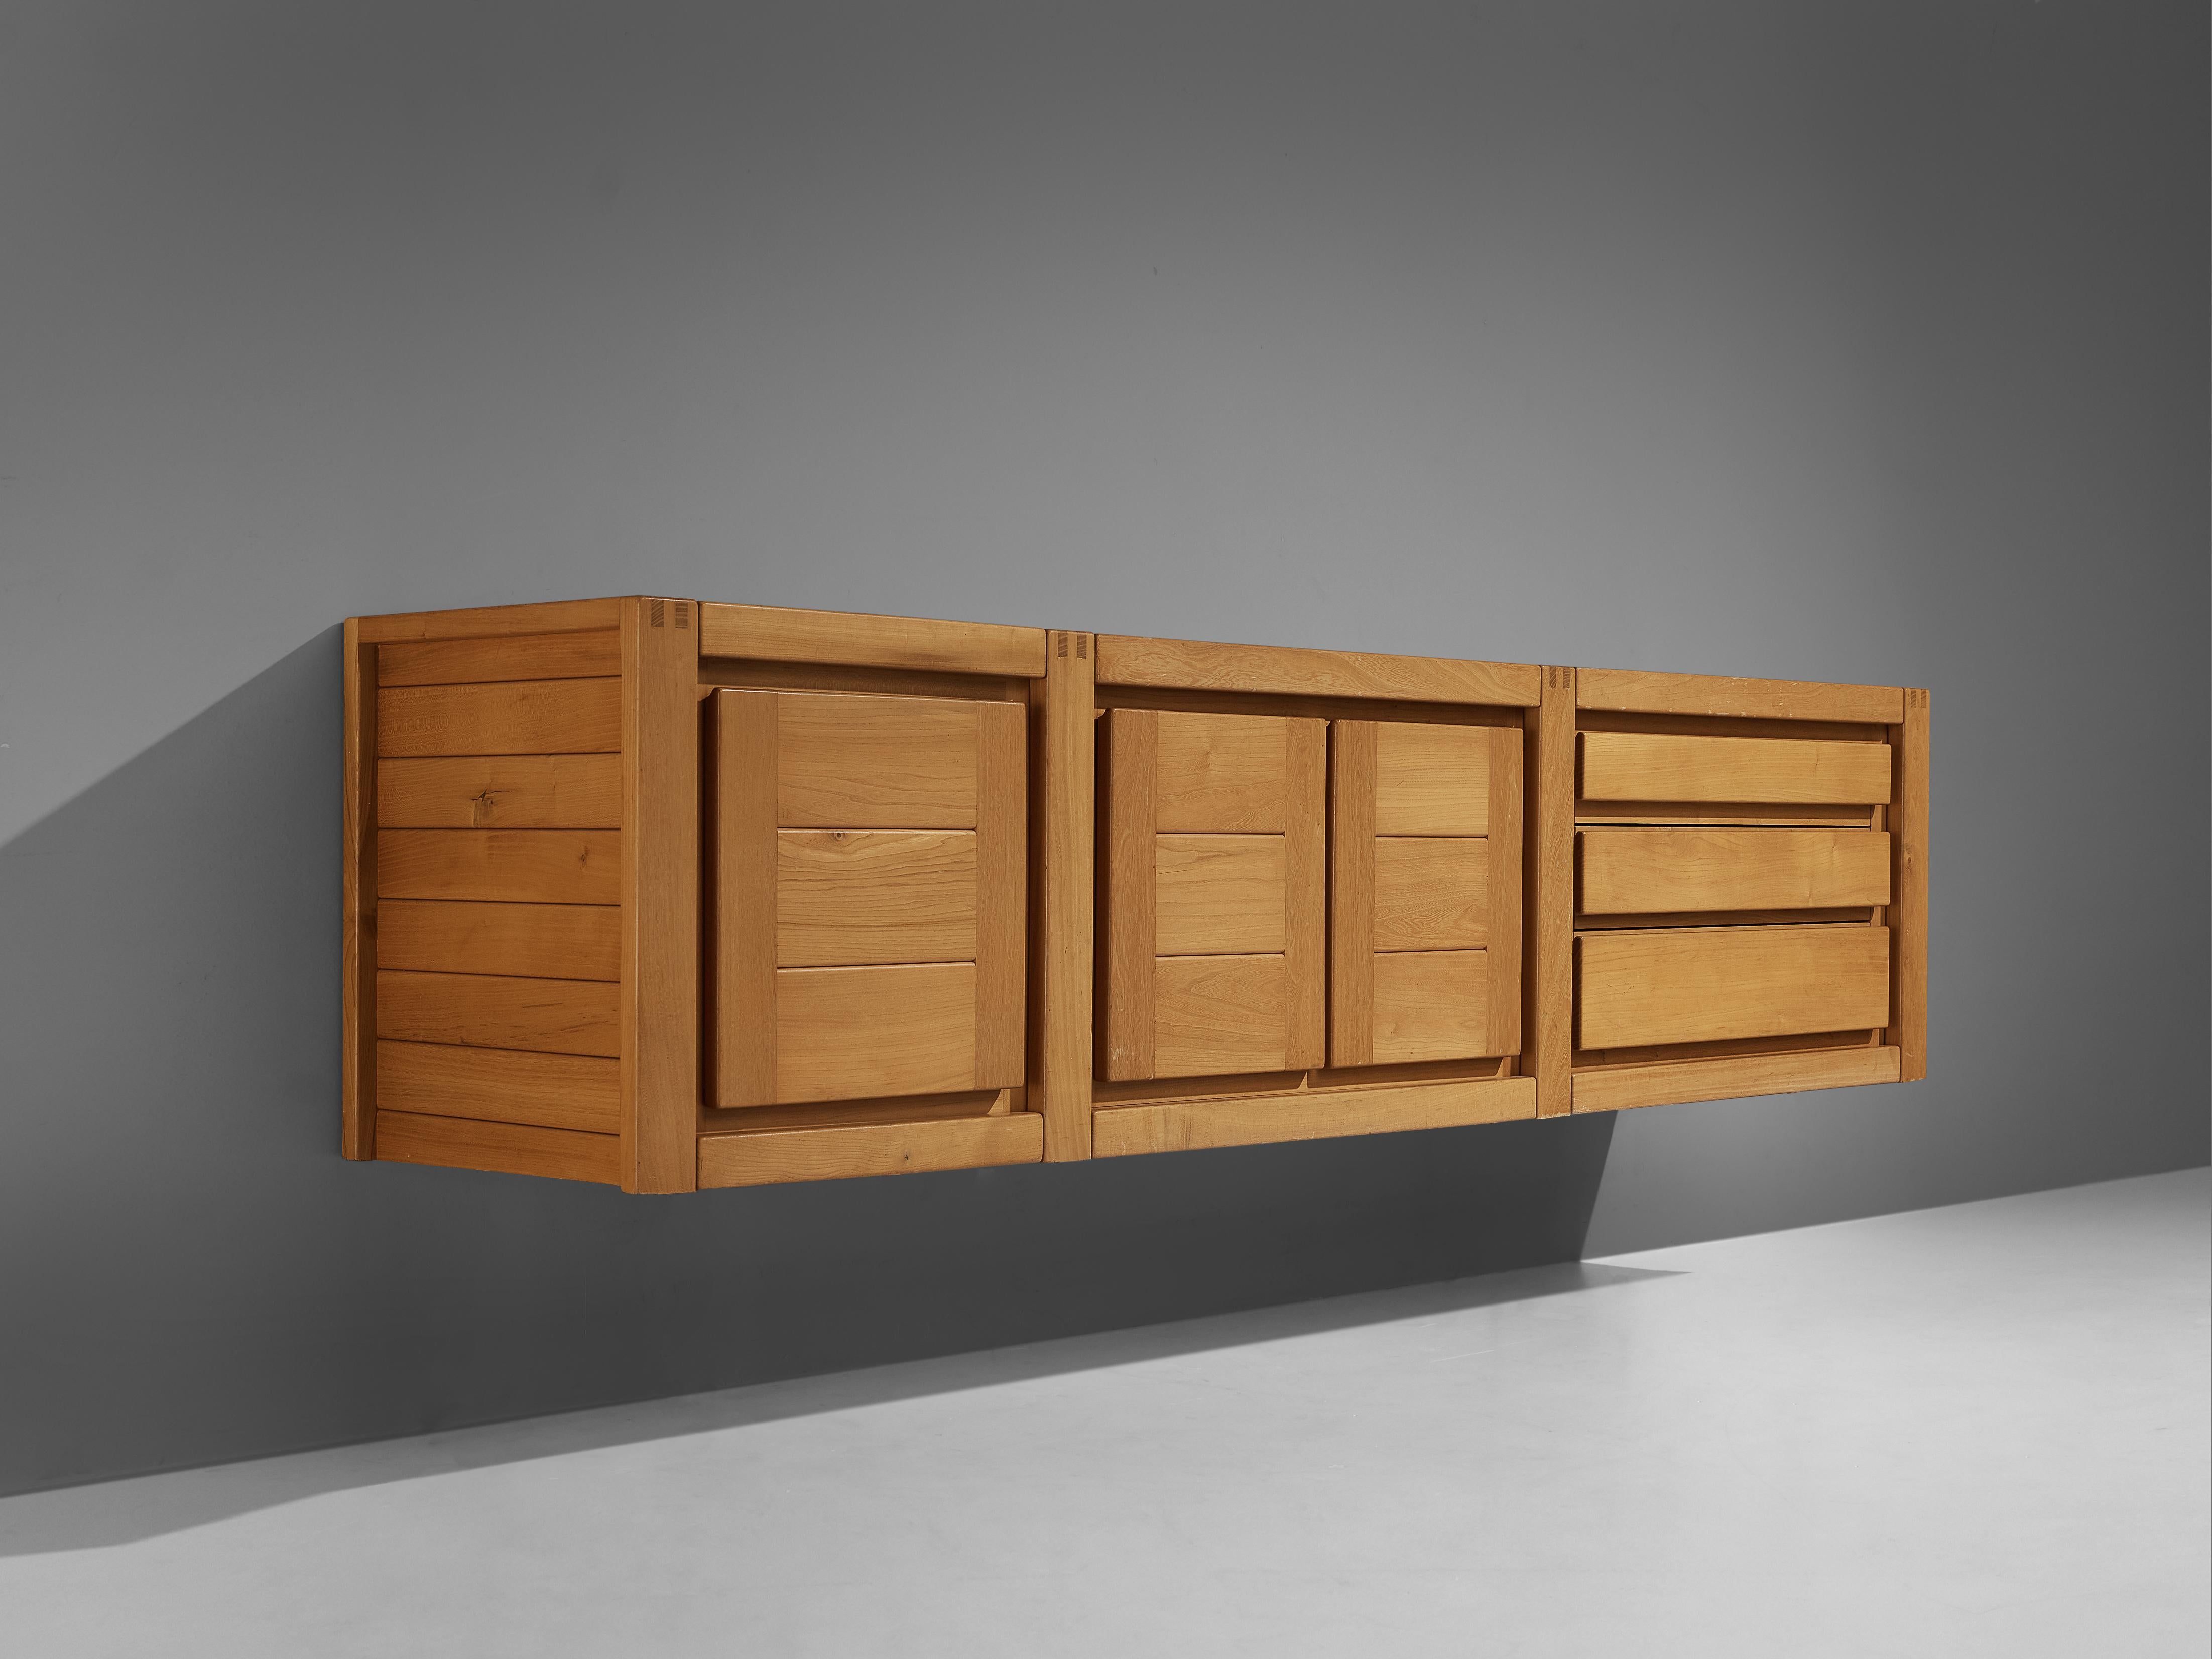 Maison Regain, wall-mounted sideboard, solid elm, France, 1970s

This sideboard by Maison Regain has a strong decorative look. It is clearly structured in three compartments. Three drawers on the right and one single door on the left accompany two